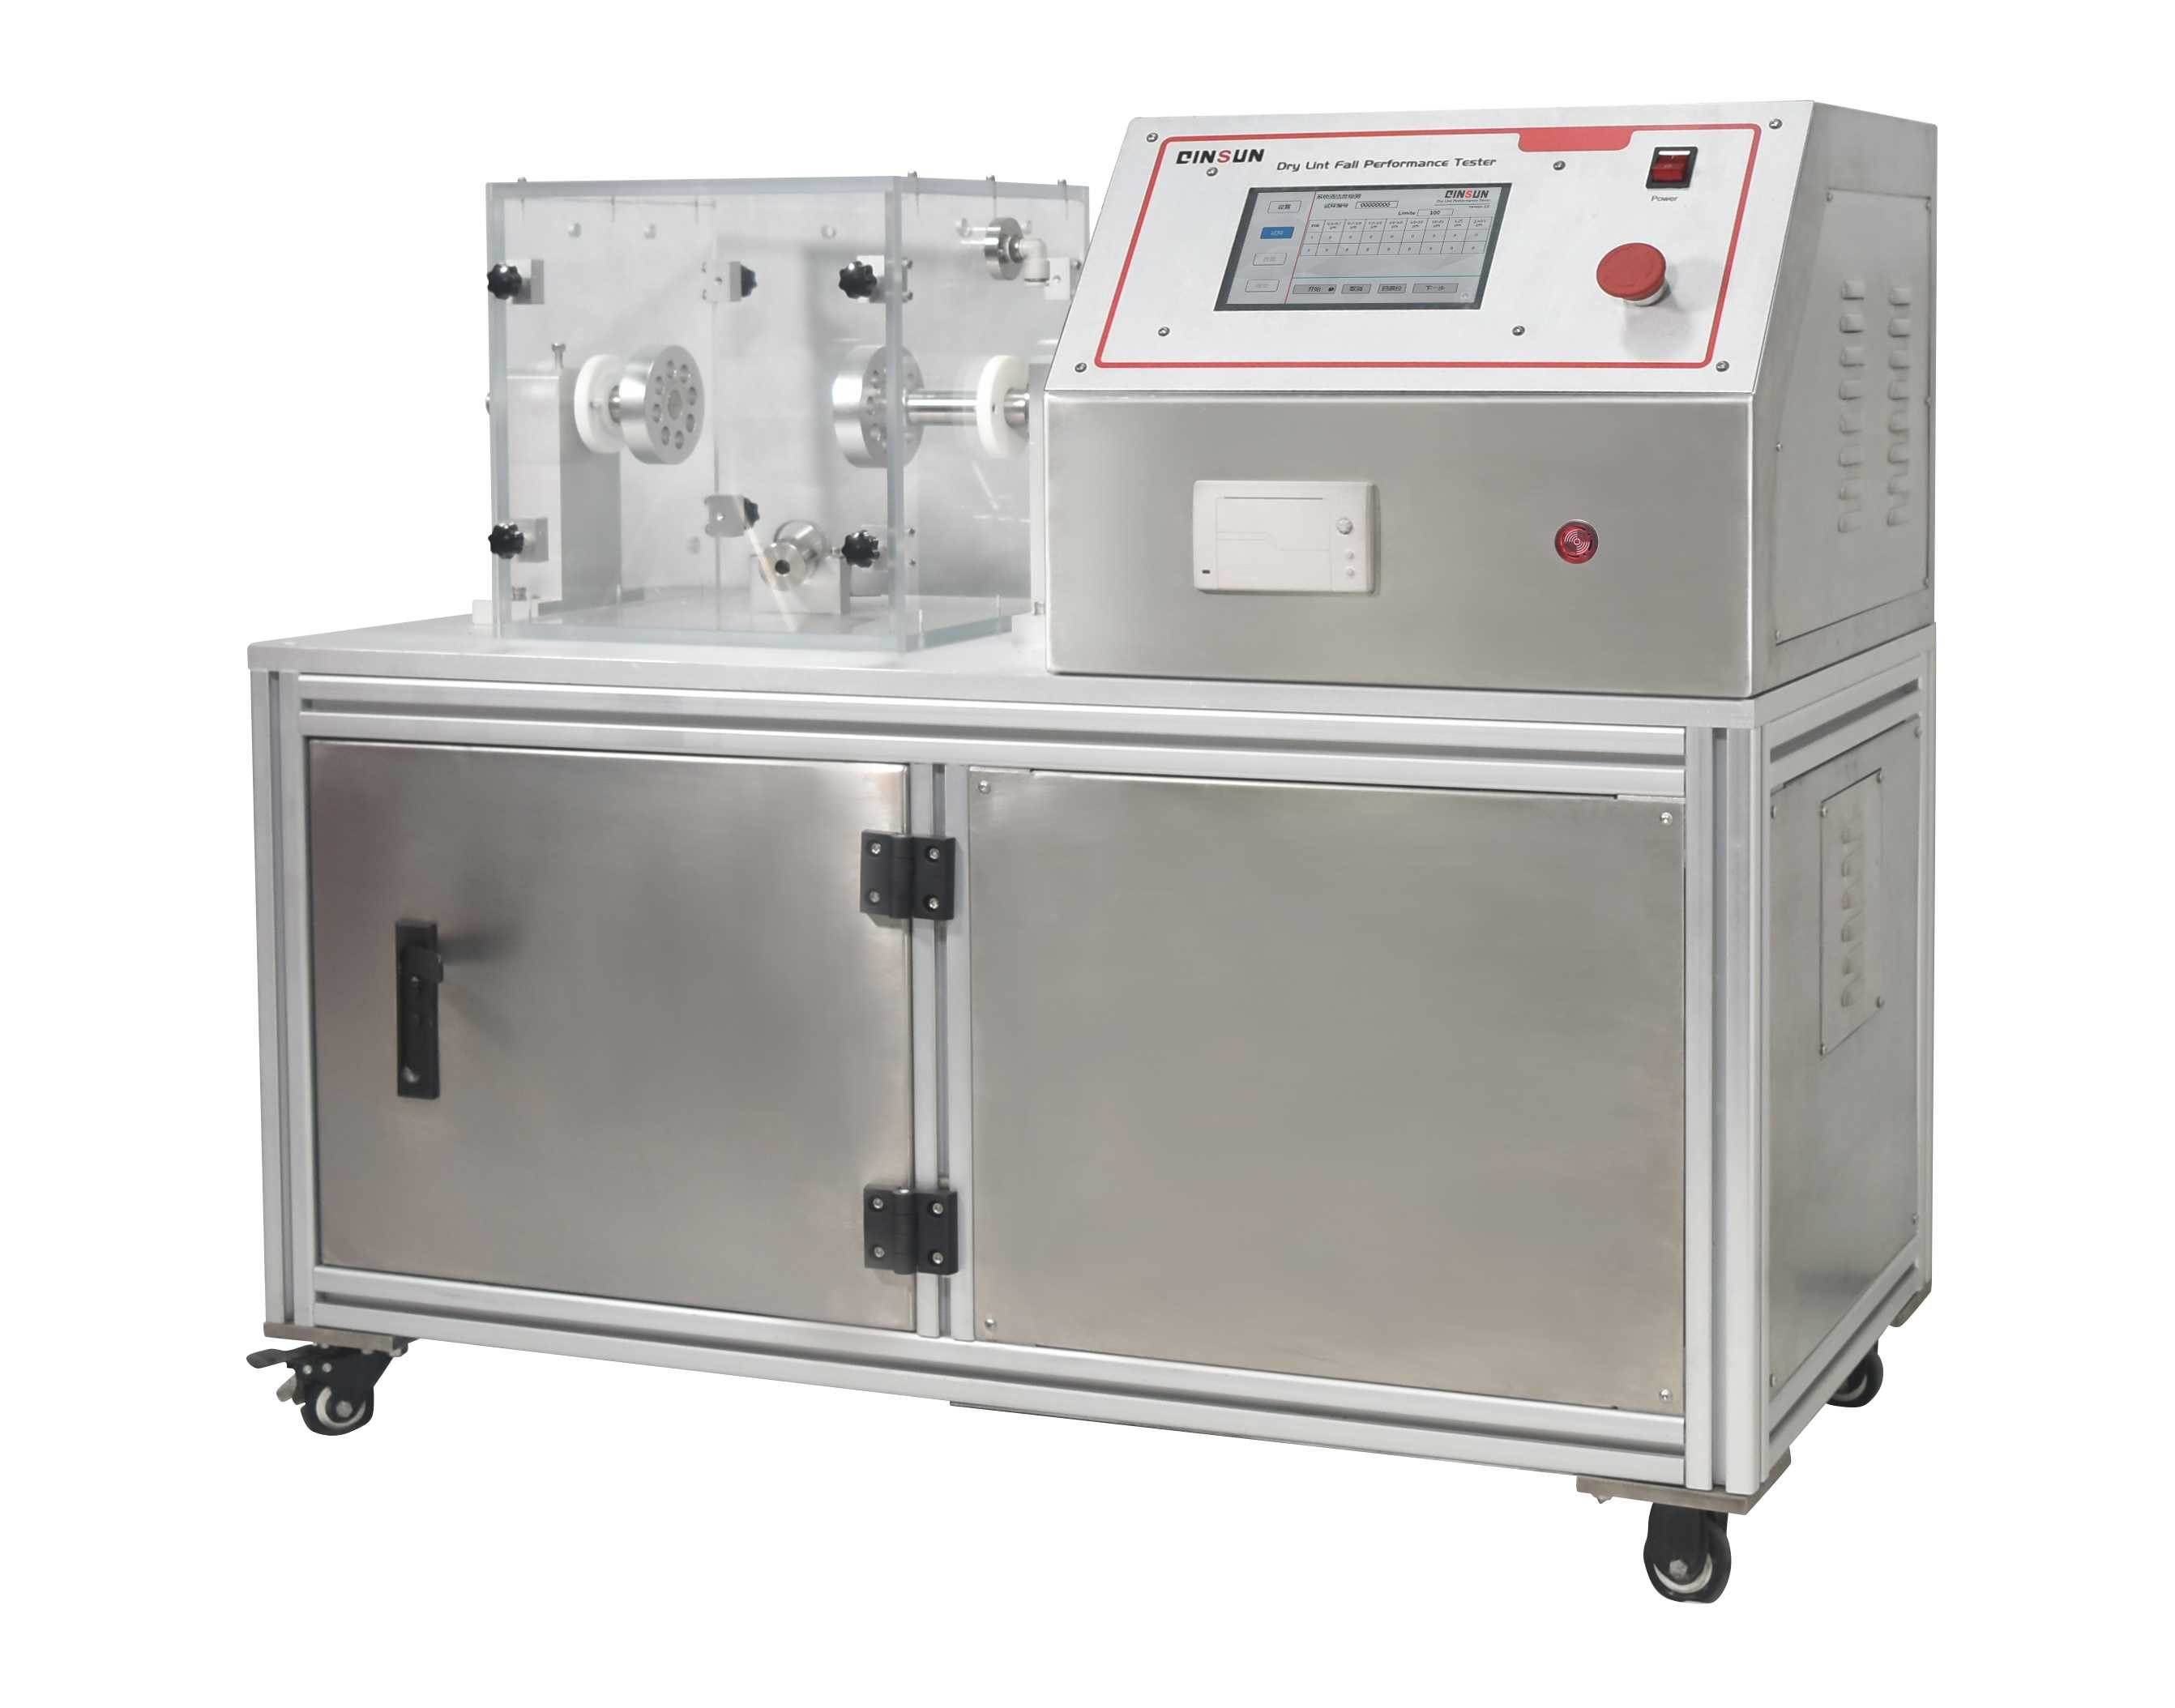 dry fallen wadding tester for Surgical textiles and nonwovens